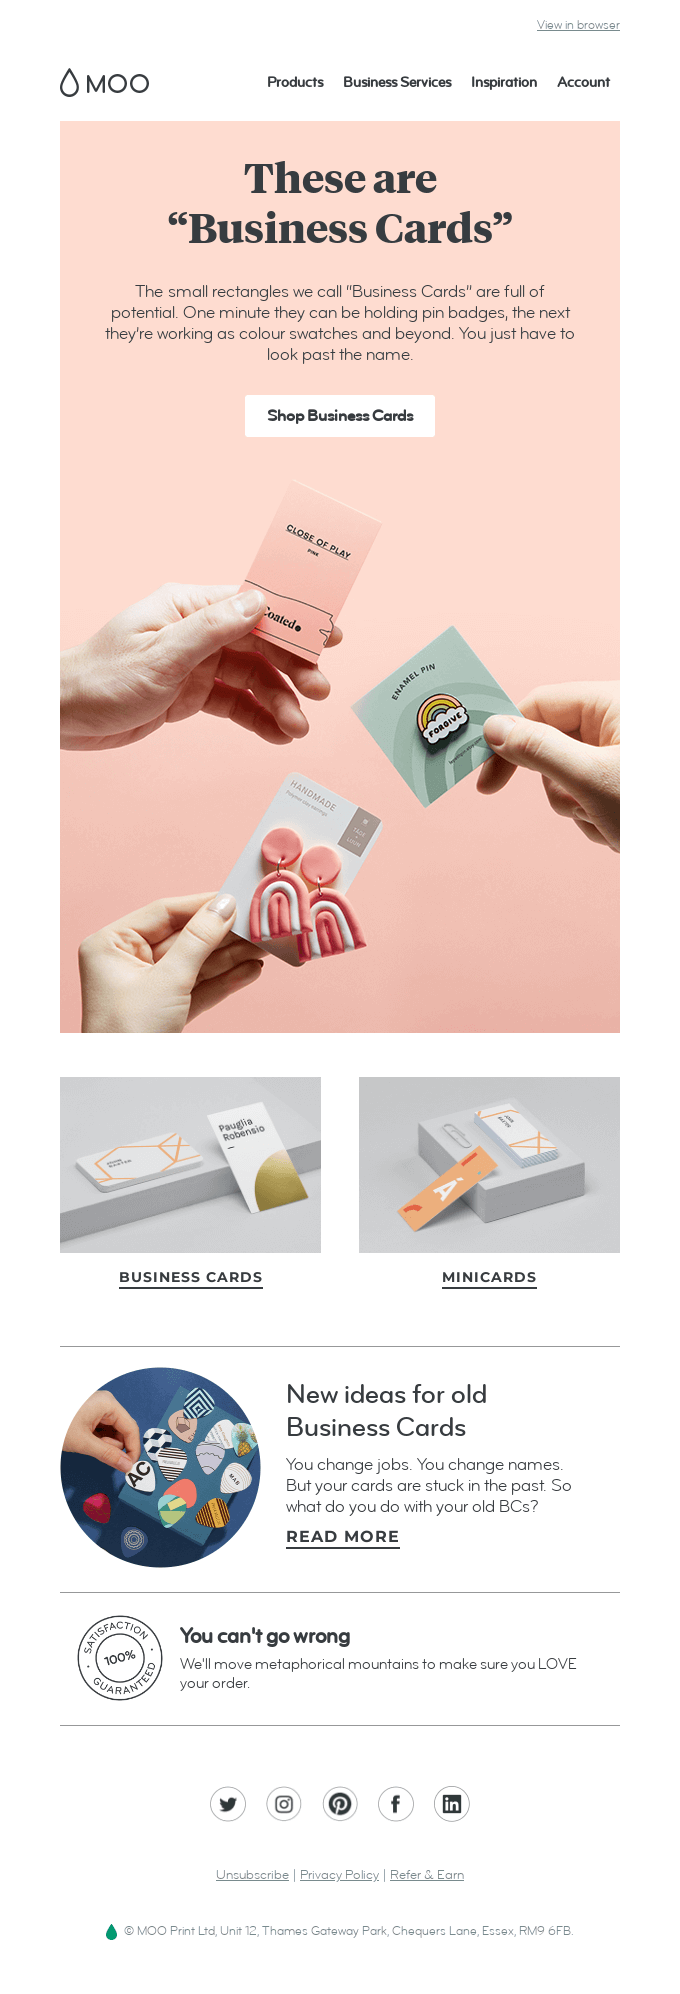 These are business cards? - Moo Email Newsletter